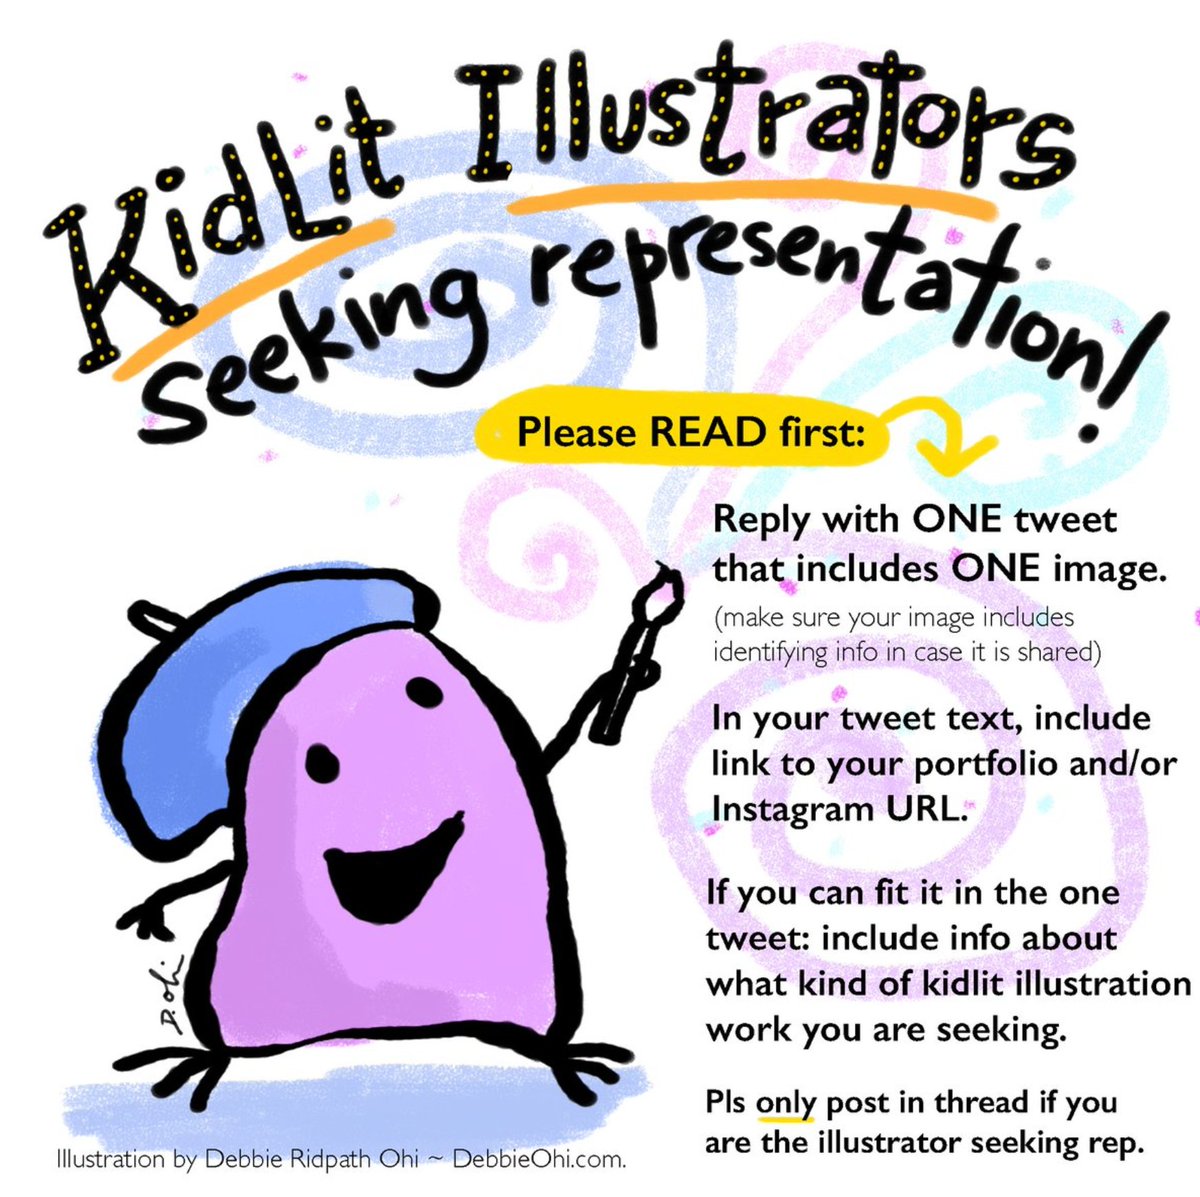 To kidlit ILLUSTRATORS seeking rep: Reply with one (1) tweet that includes 1 image (I advise your name be in image somewhere) + link to your portfolio and/or Instagram URL. Makes sure it's easy to find your contact info, if agents are interested! cont'd